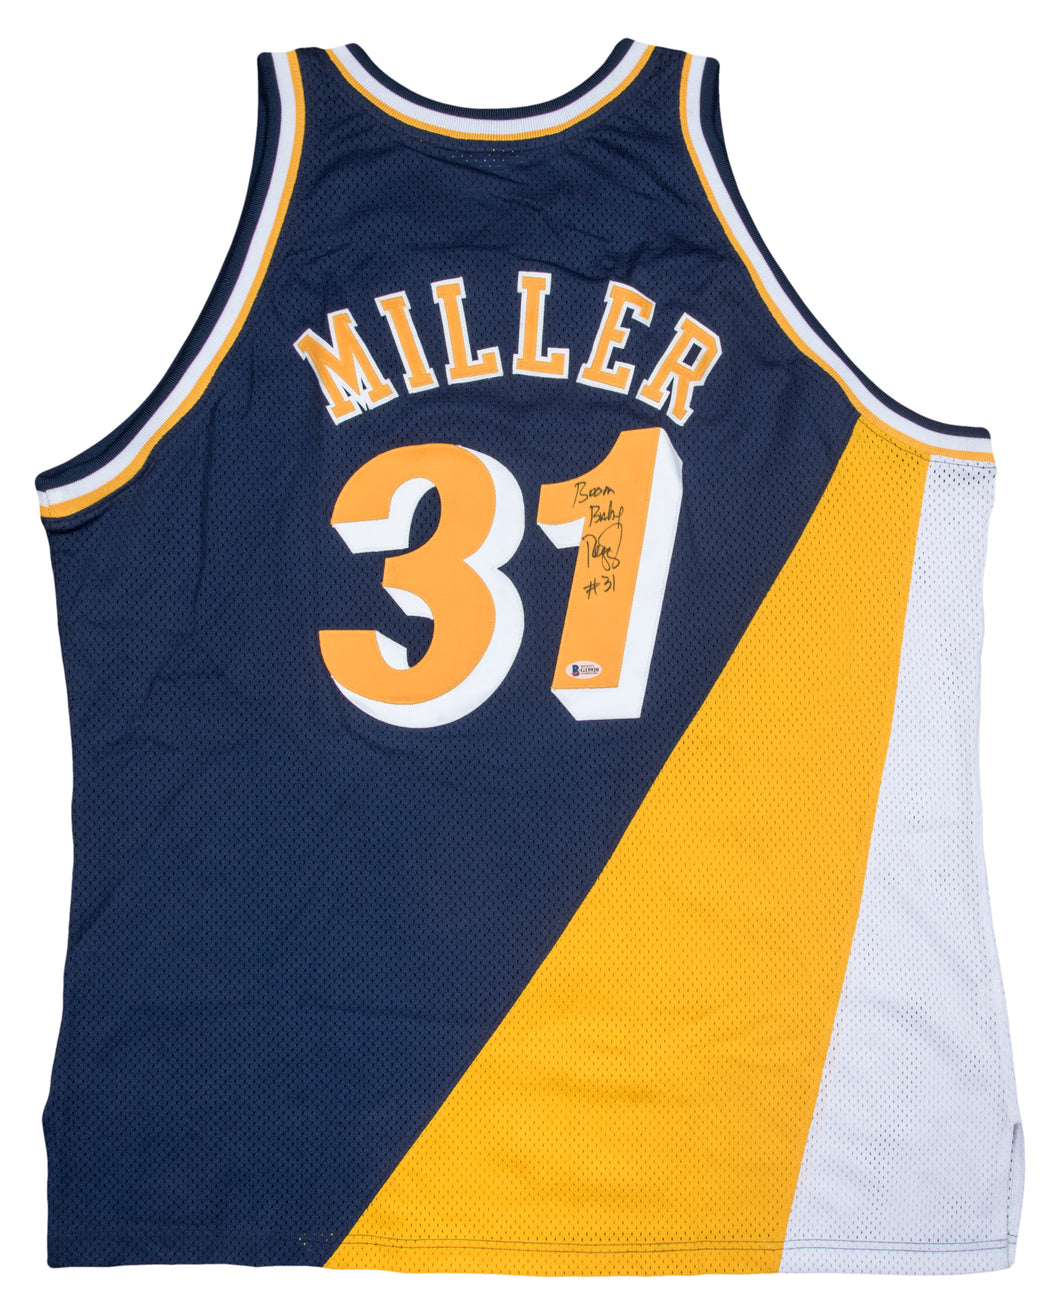 Reggie Miller Autographed Indiana Pacers Jersey